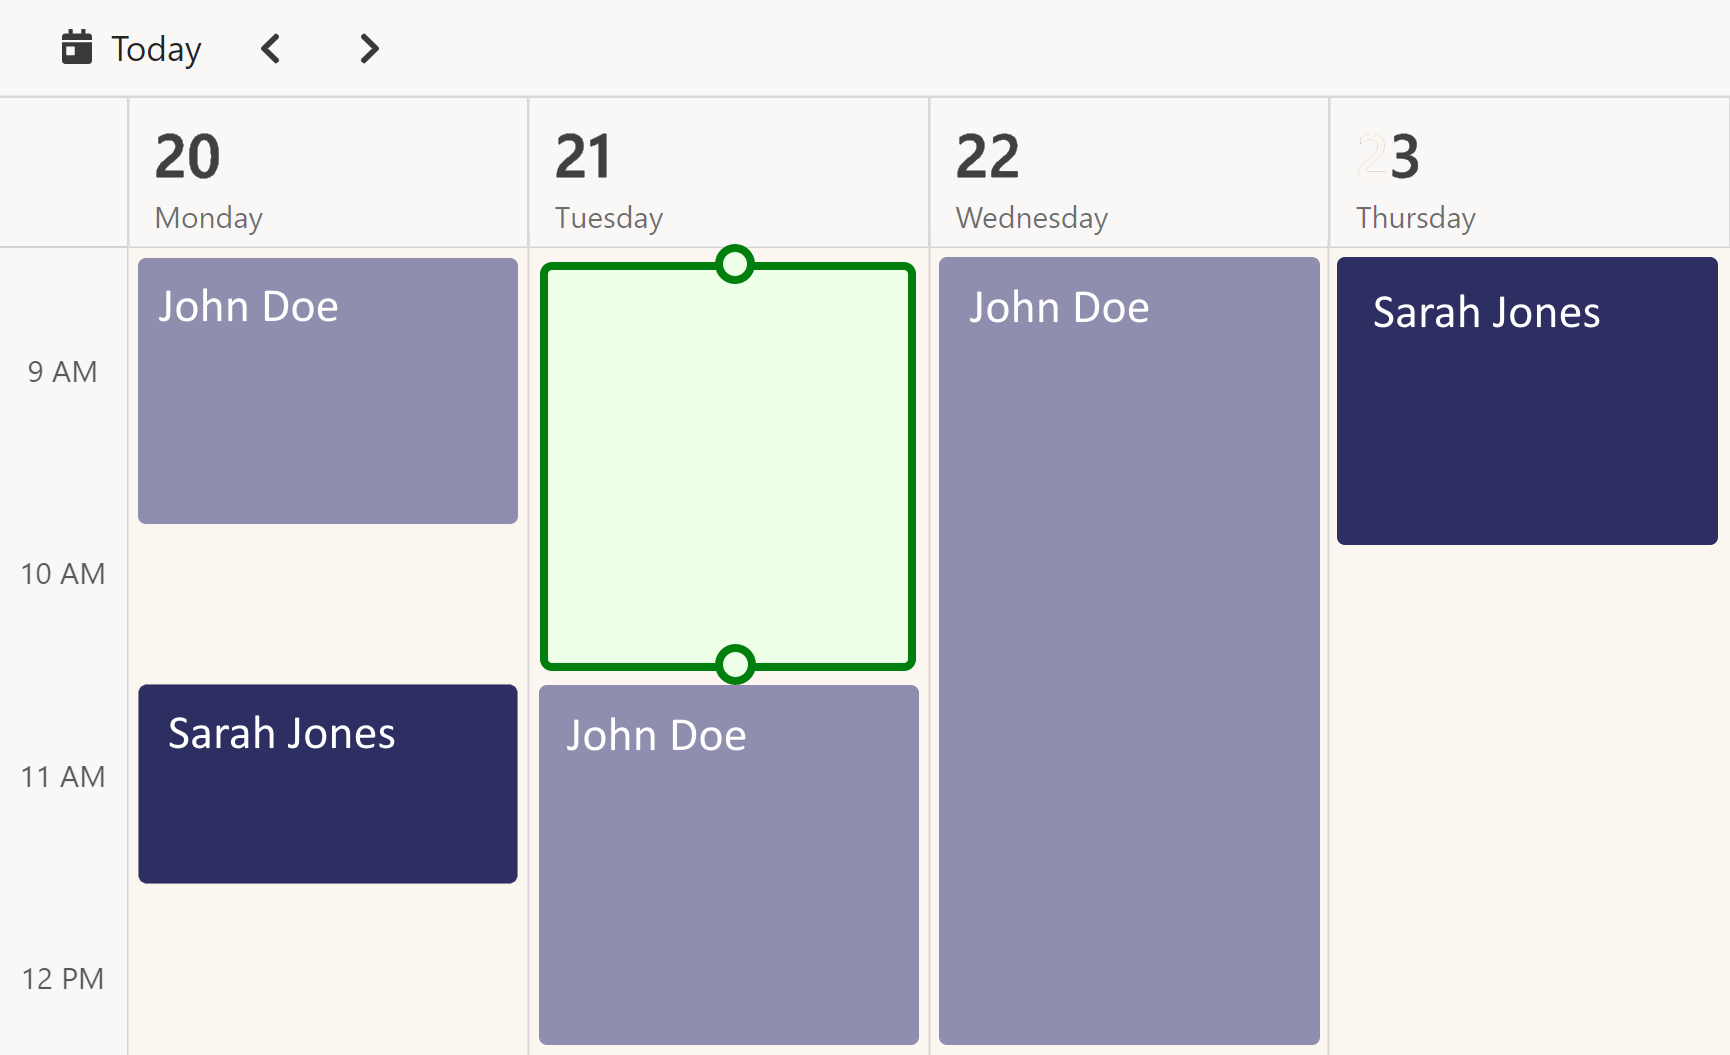 Schedule meetings faster with your colleagues, partners and clients